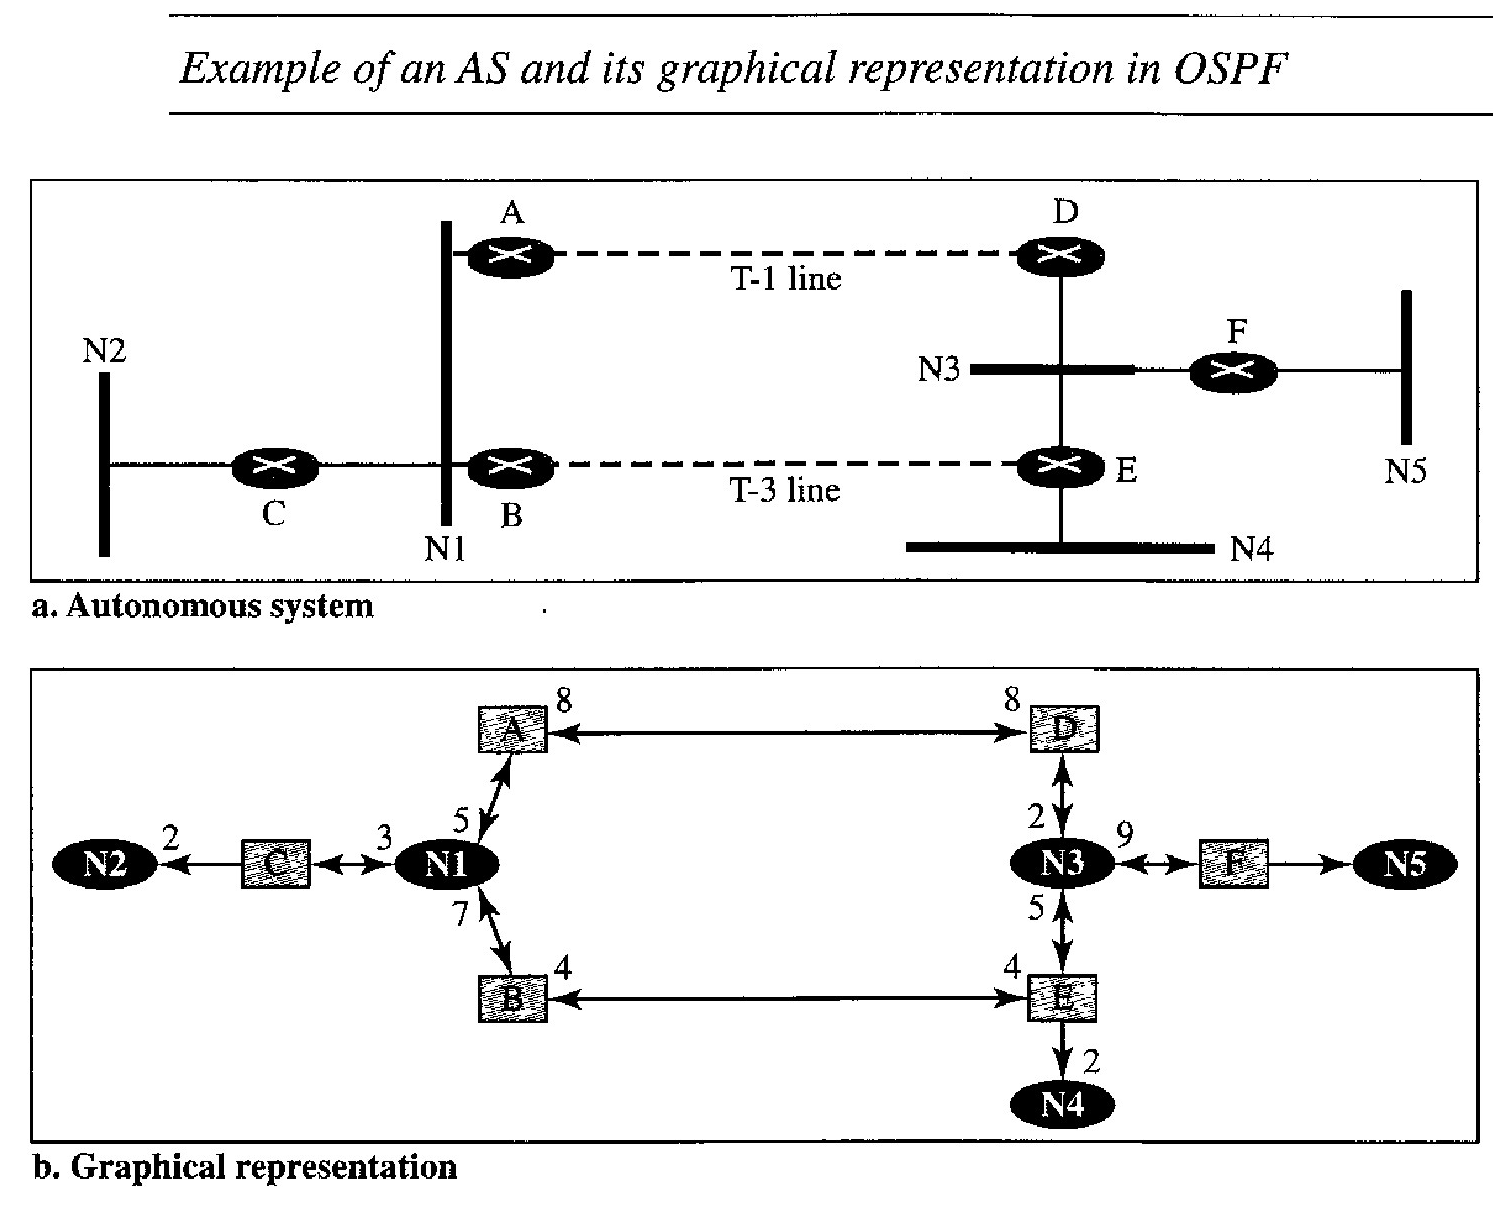 Example of an AS and its graphical representation in OSPF